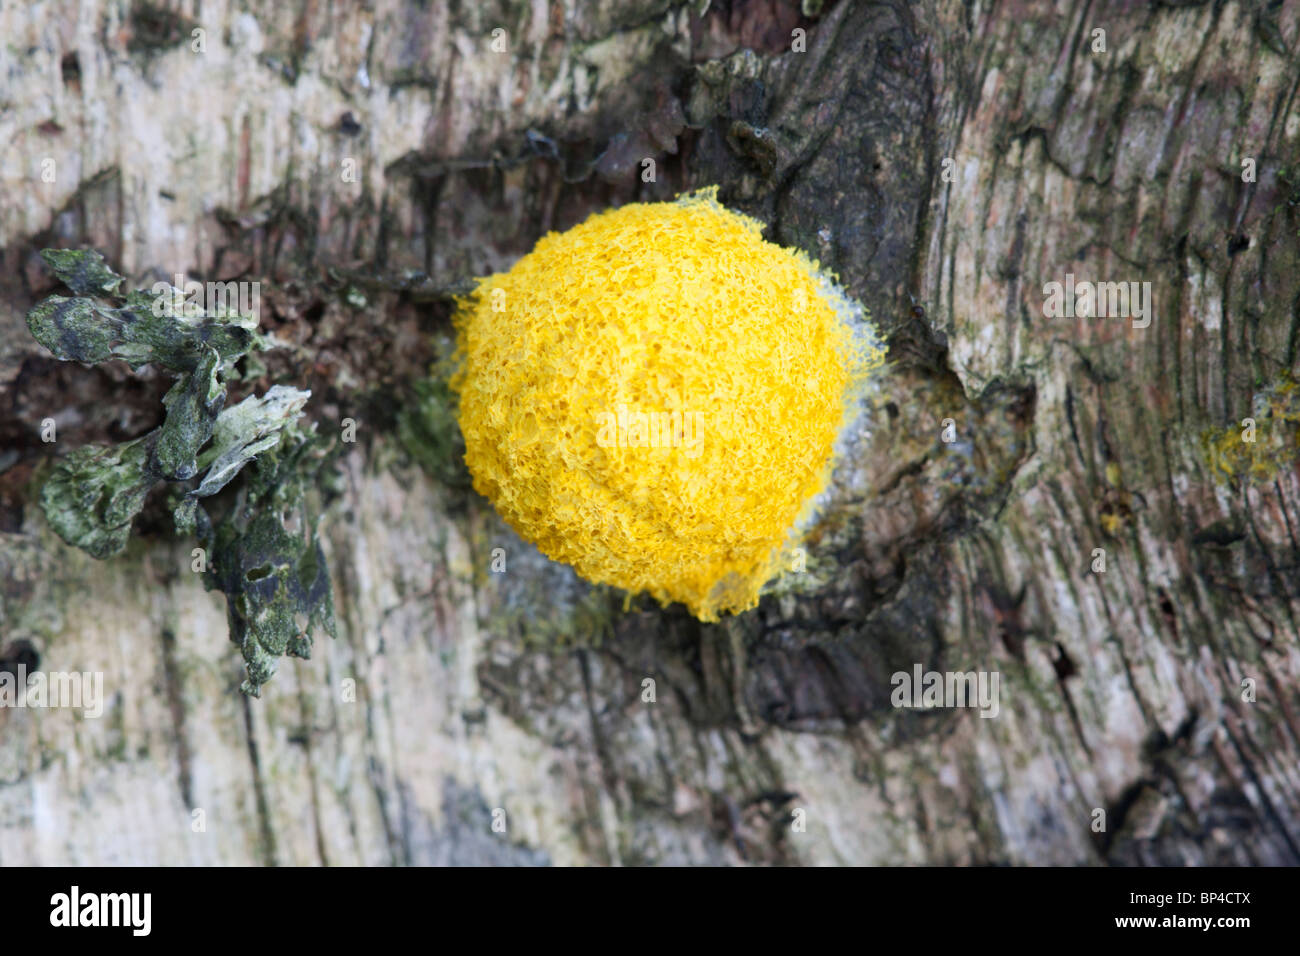 Dog Vomit Slime Mold (Srambled Egg Slime) (Troll's Butter) Fuligo septica growing on a Silver Birch log Stock Photo